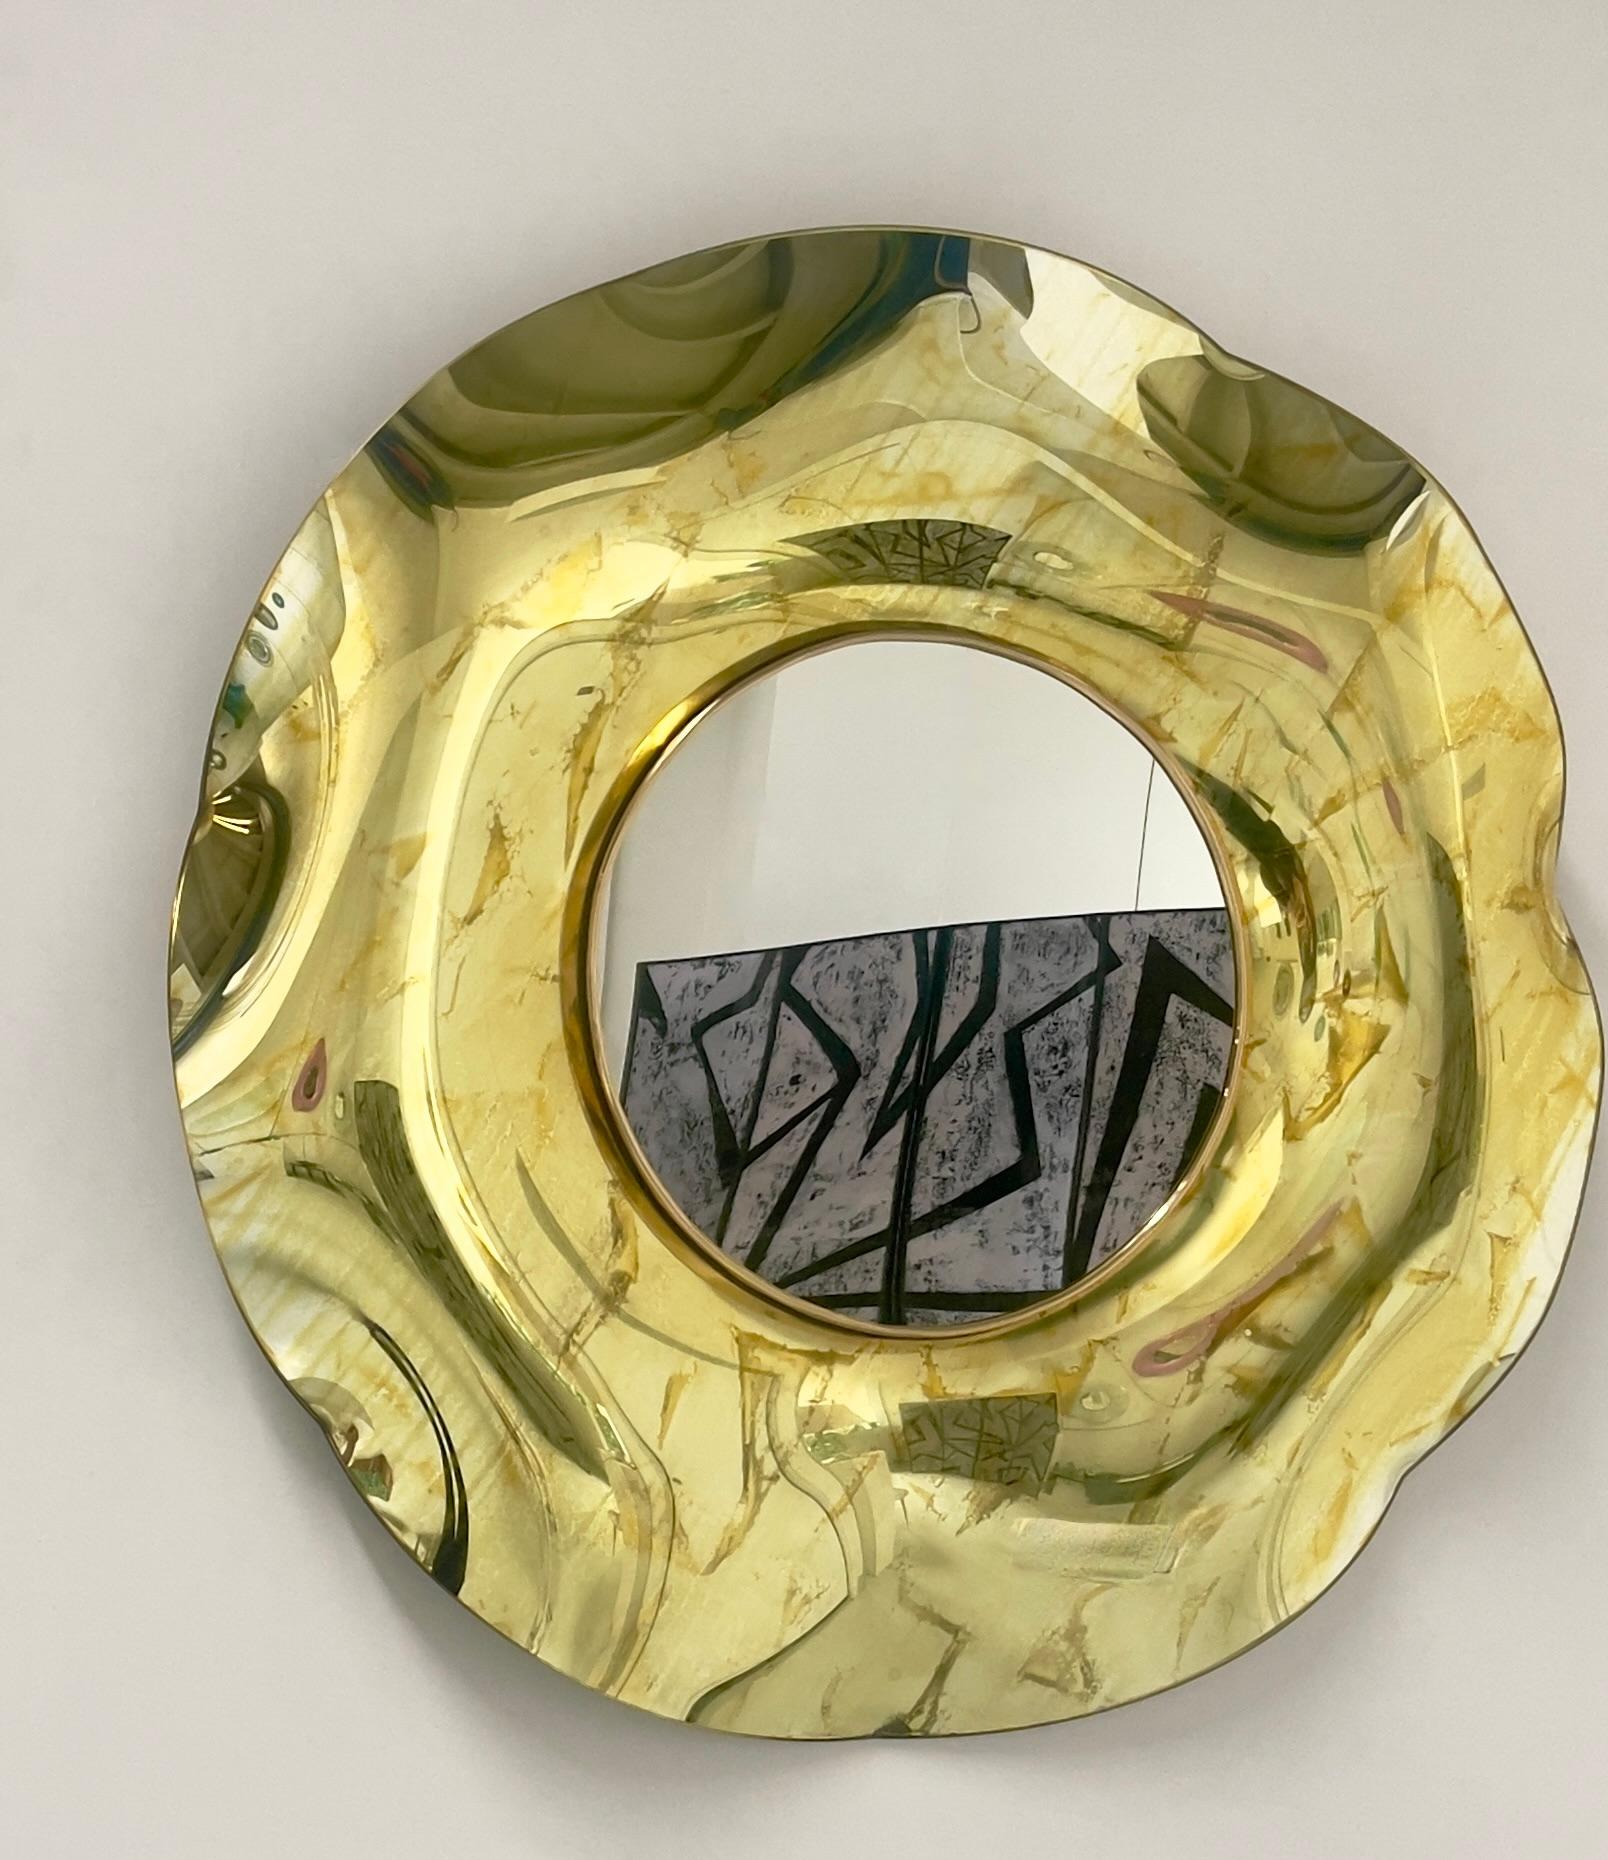 Contemporary 'Undulate' Handmade Gold Crystal Mirror Dia. 40'' by Ghiró Studio For Sale 3